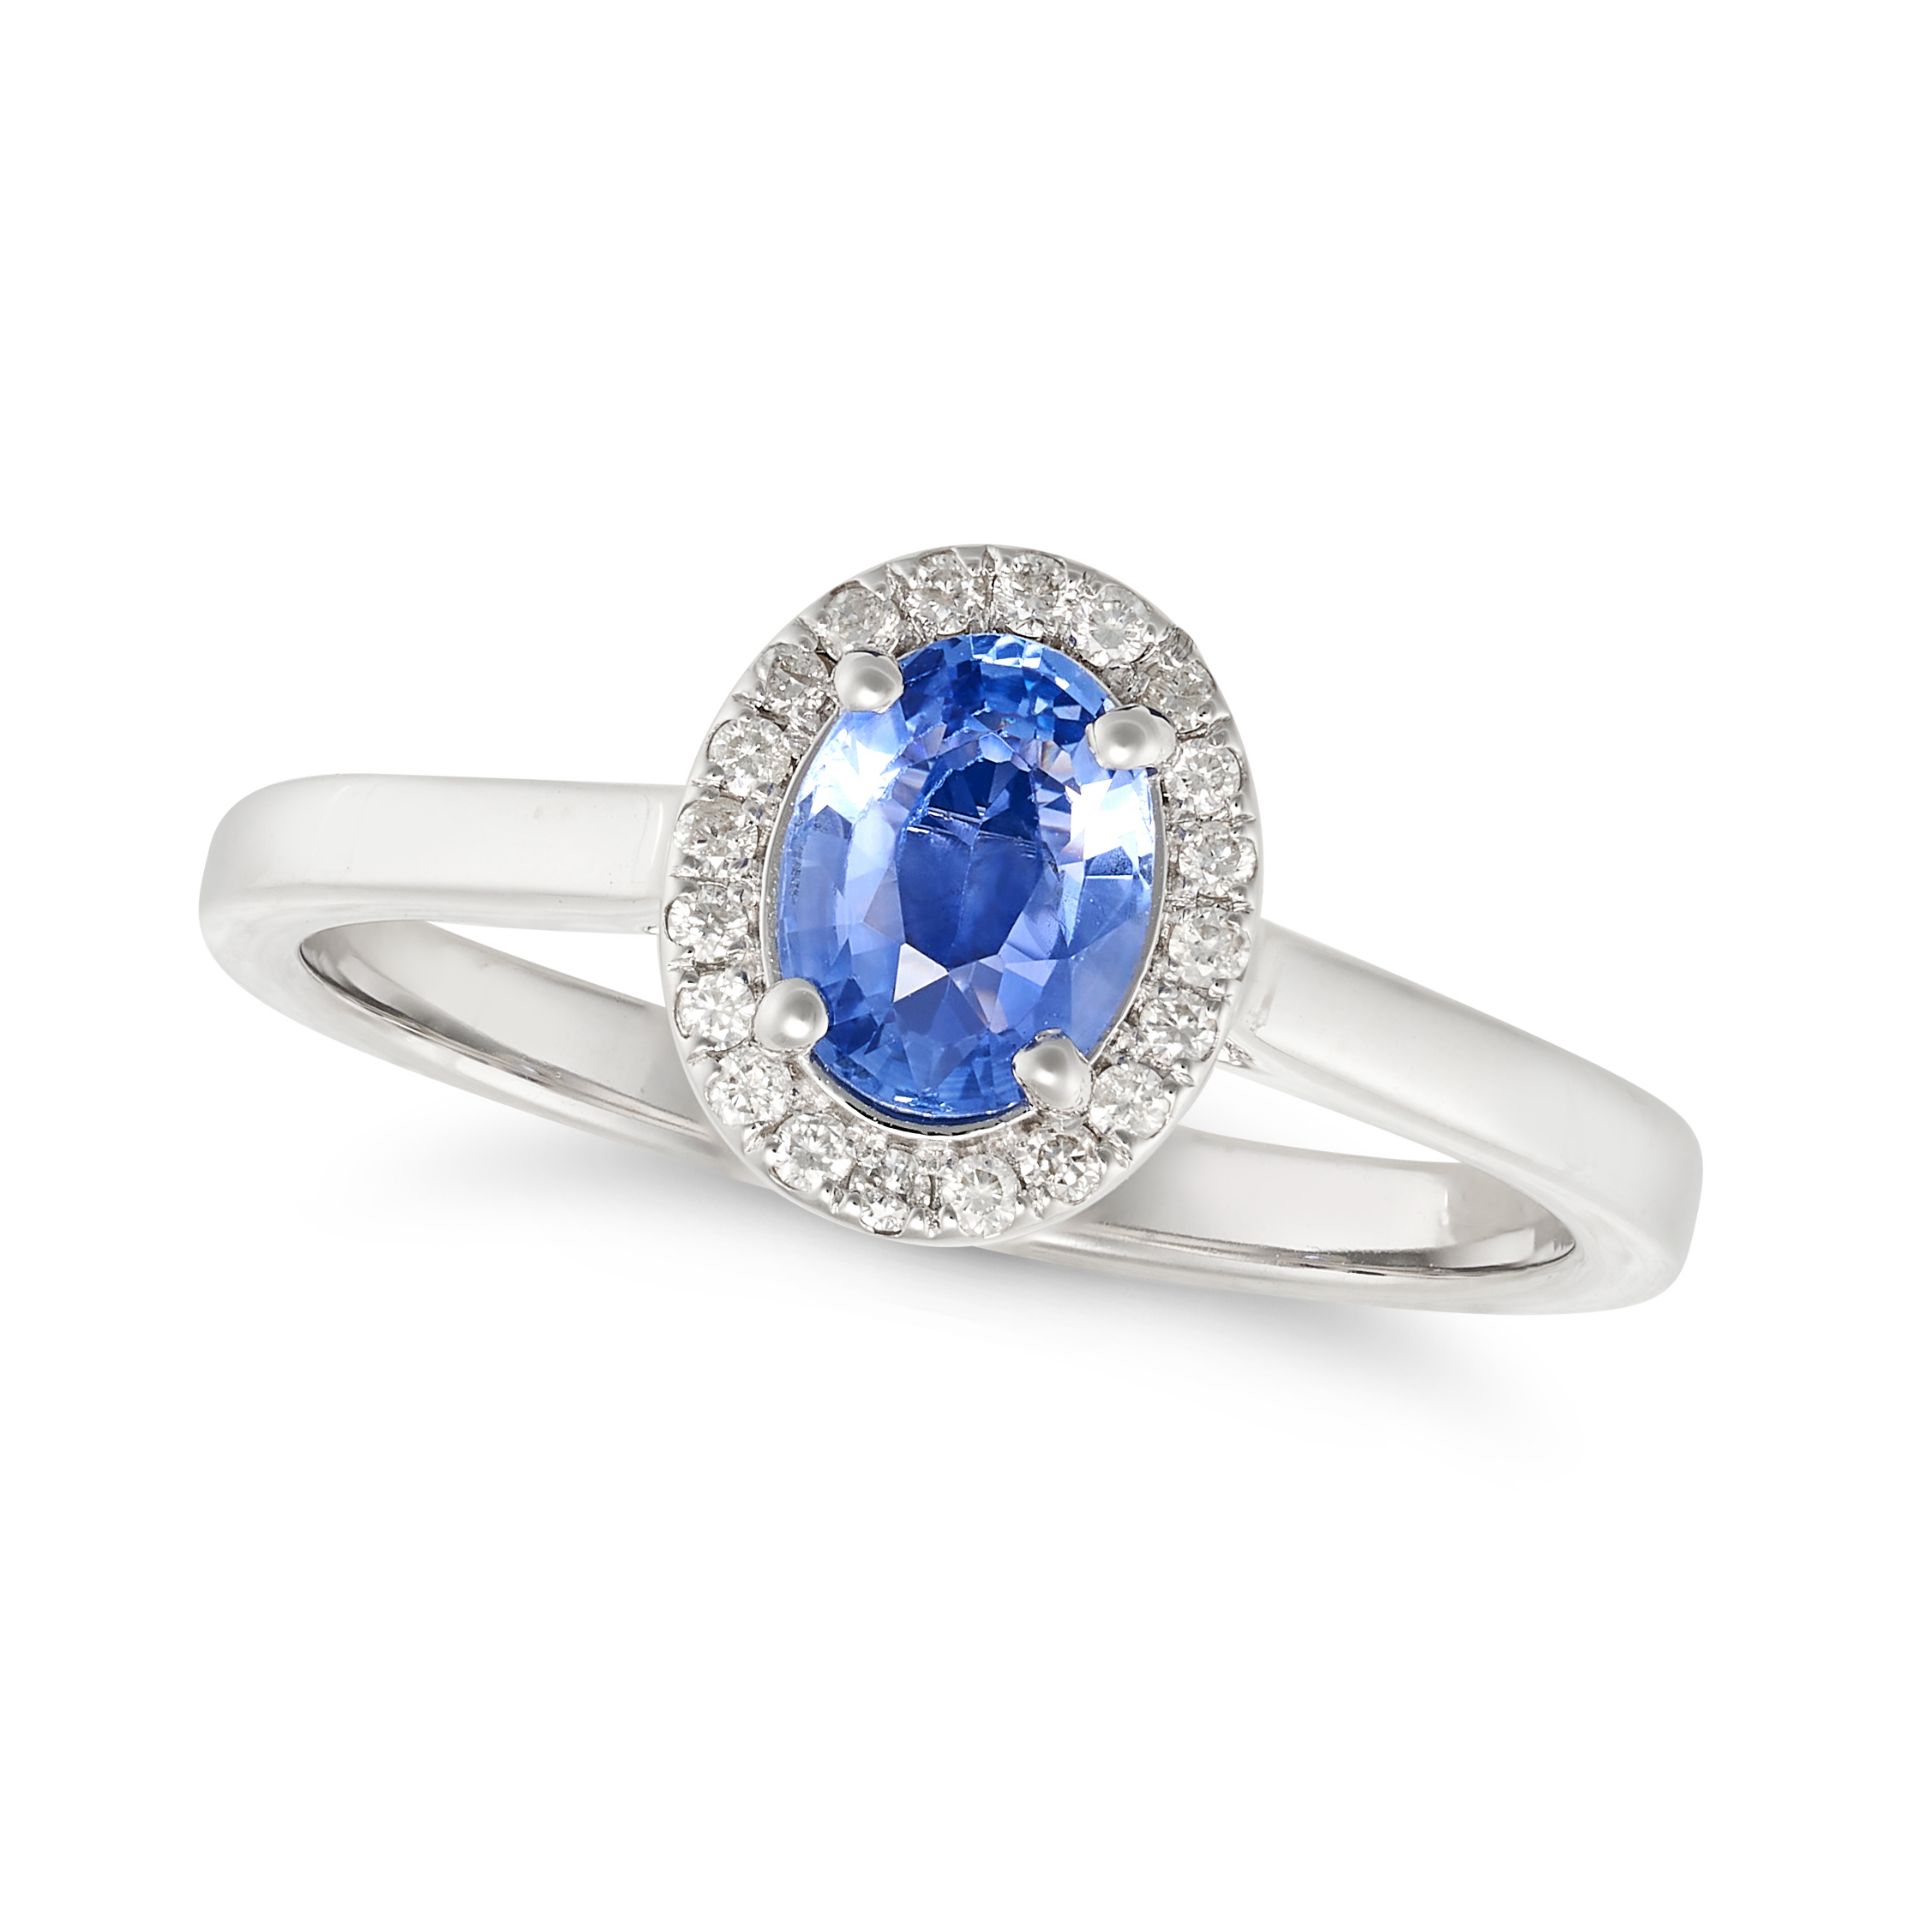 A SAPPHIRE AND DIAMOND CLUSTER RING in 18ct white gold, set with an oval cut sapphire in a cluste...